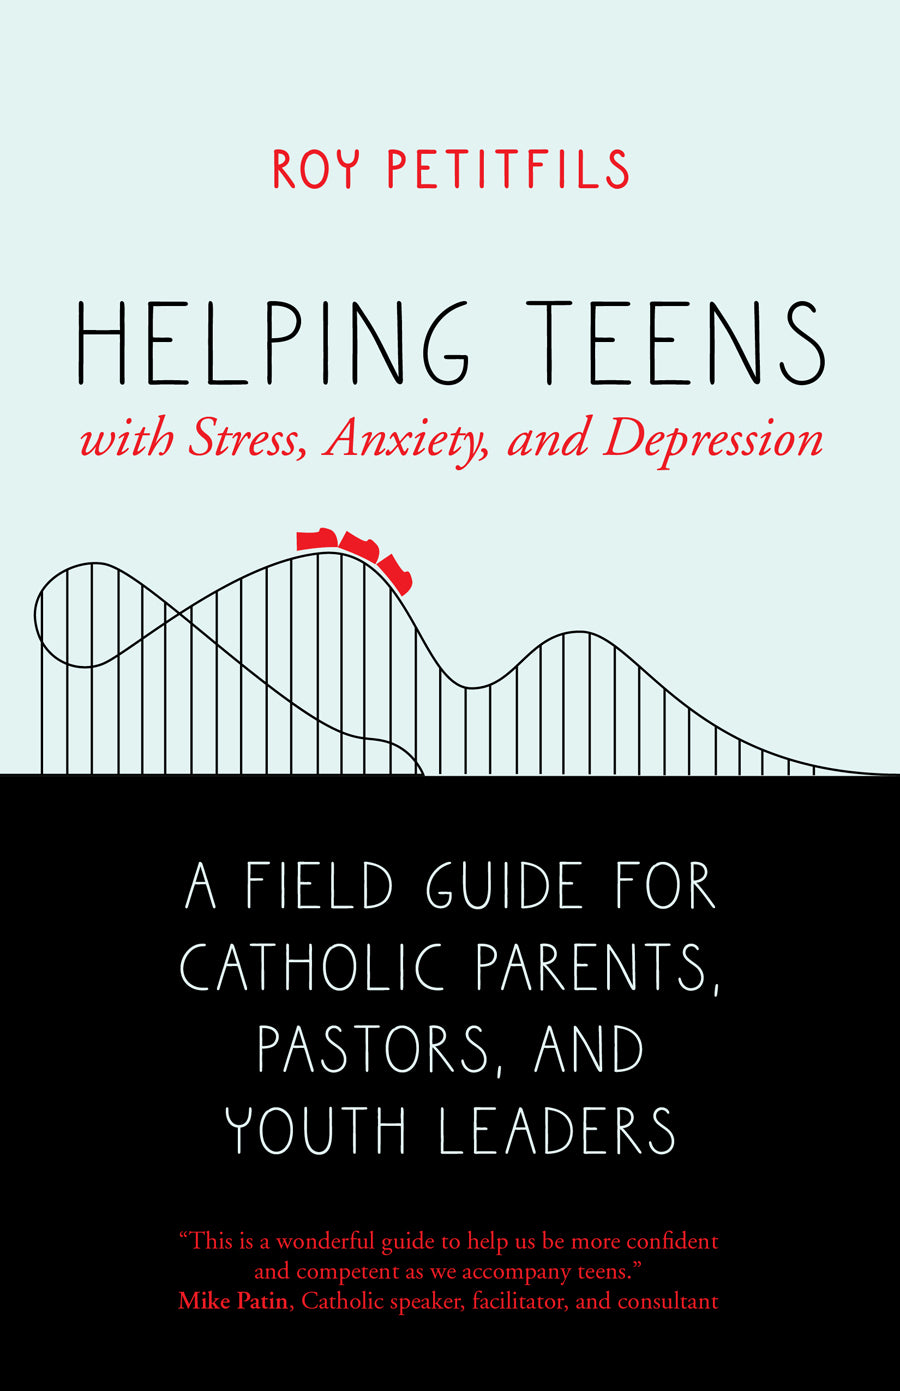 HELPING TEENS WITH STRESS, ANX